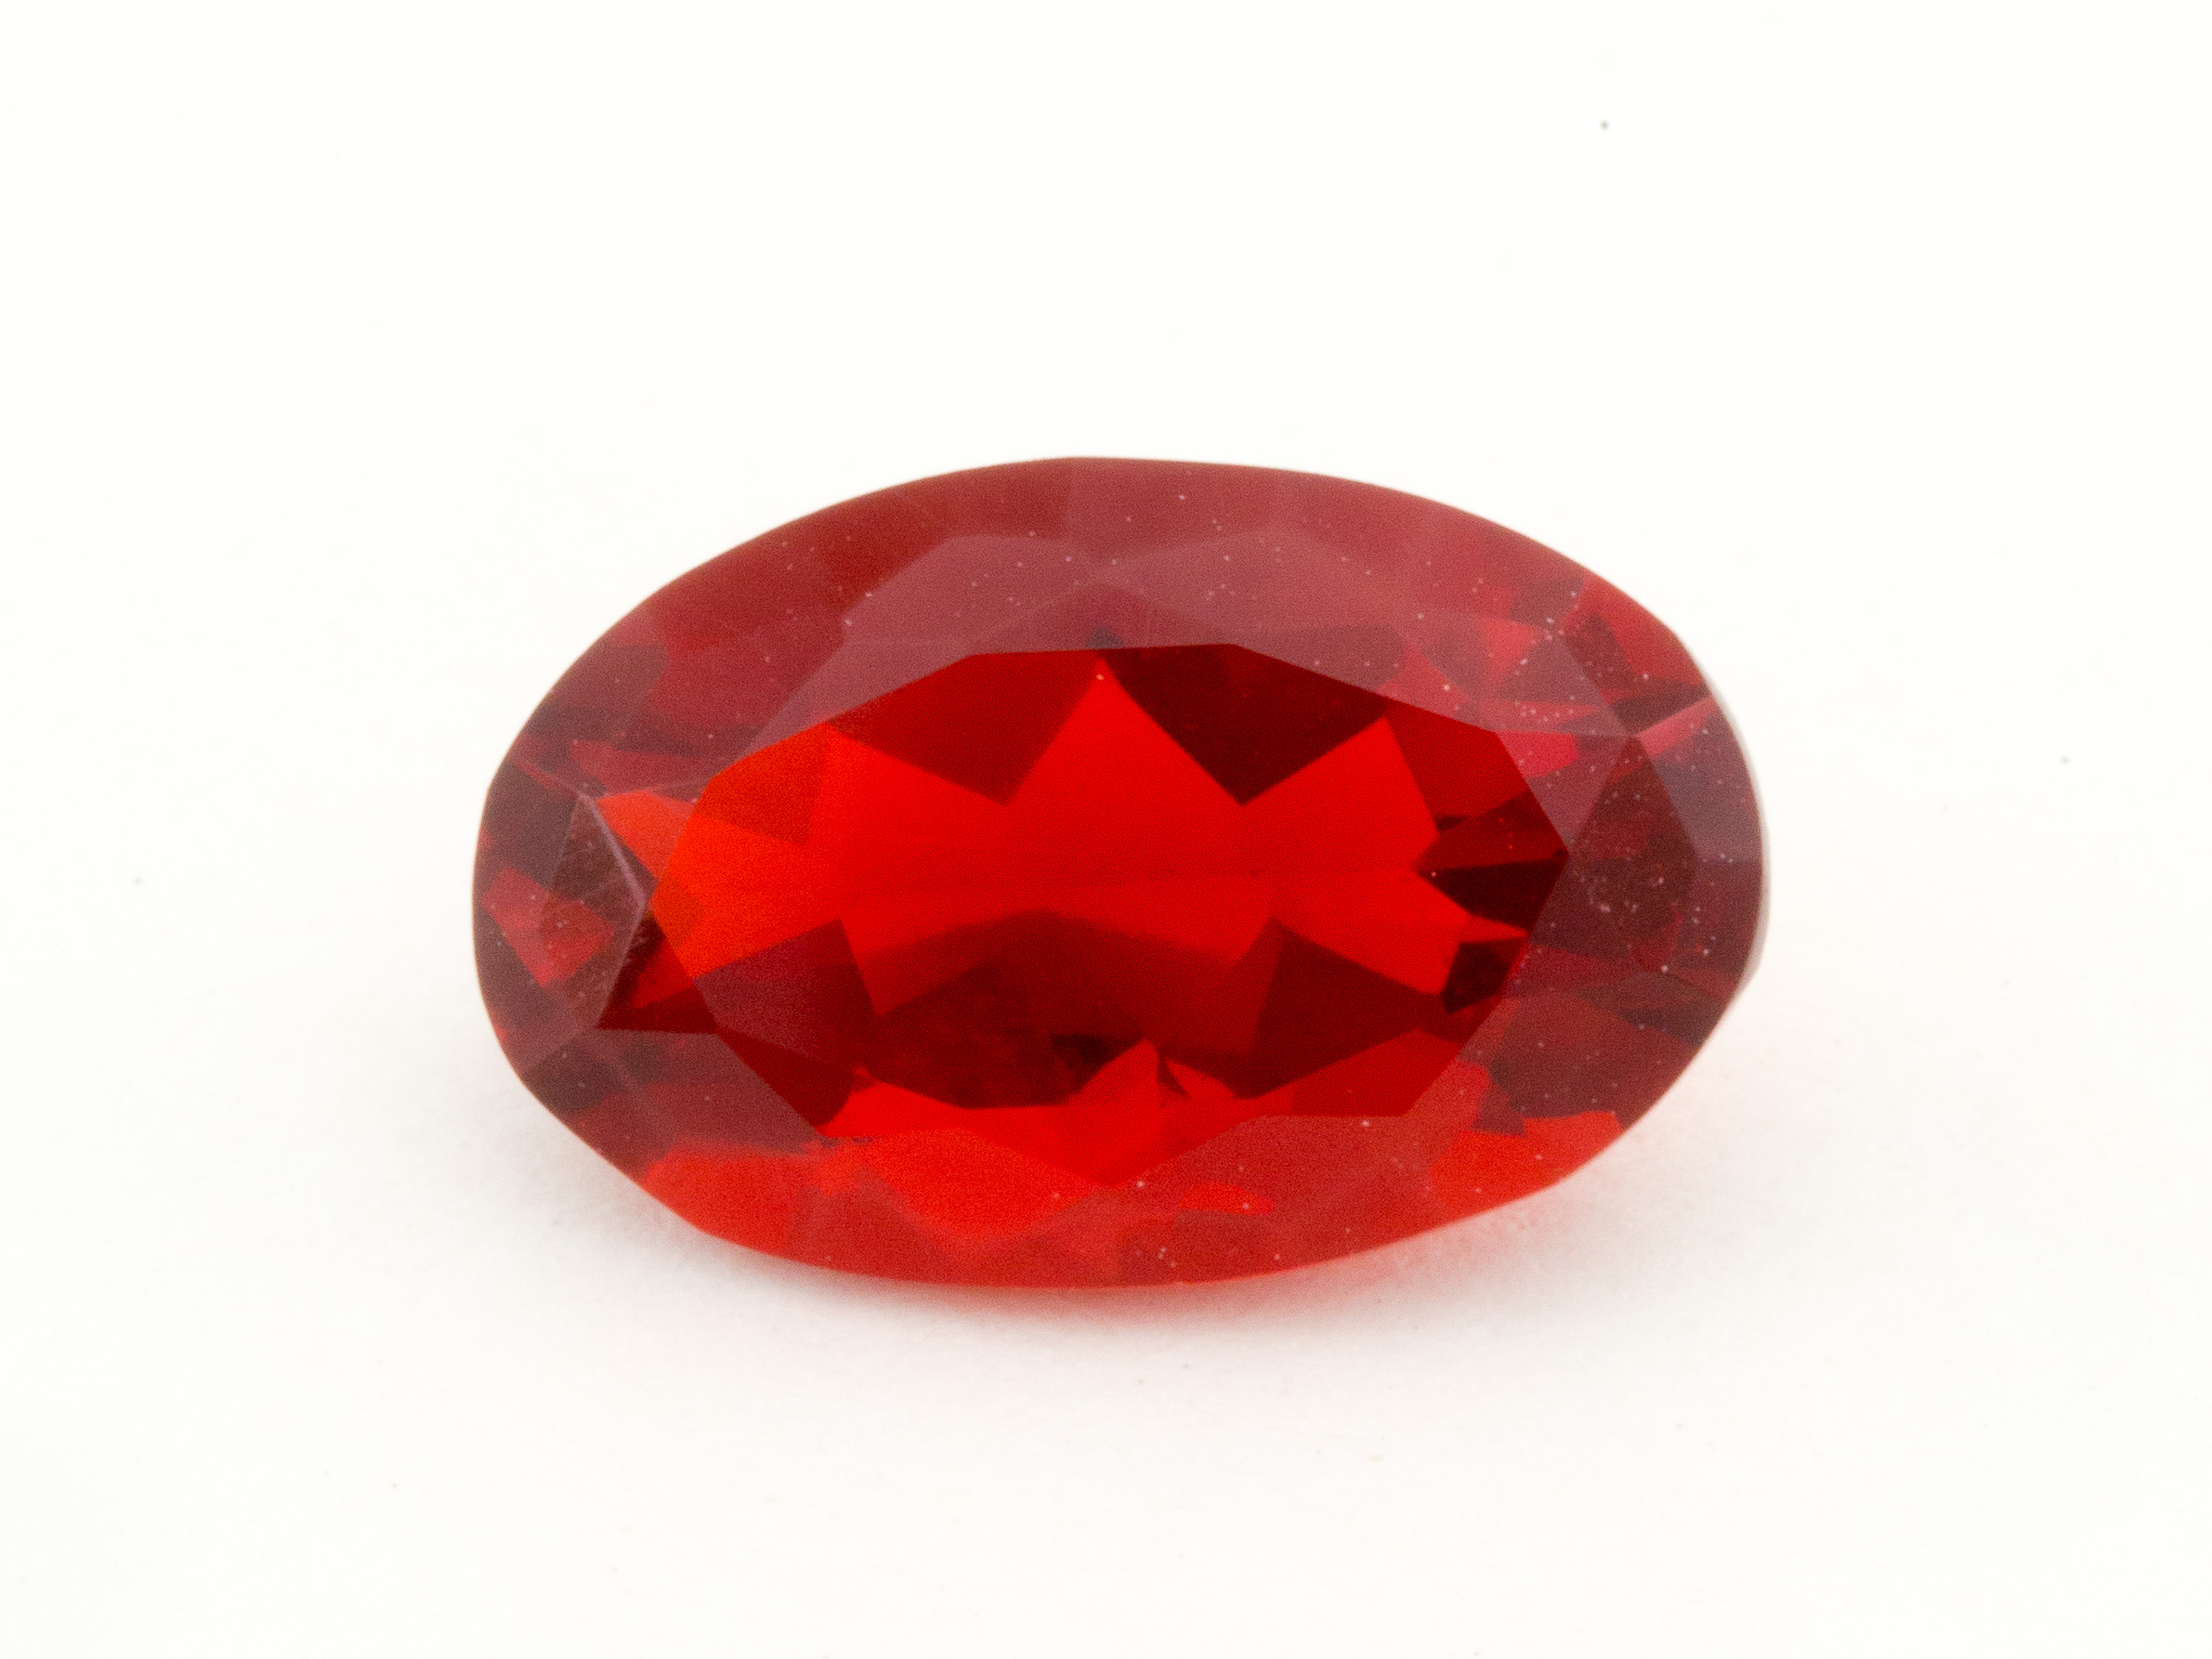 Alle Pelagic obligat 1.4ct Faceted Red Oval Mexican Fire Opal (MO168) - Gems By Gerald